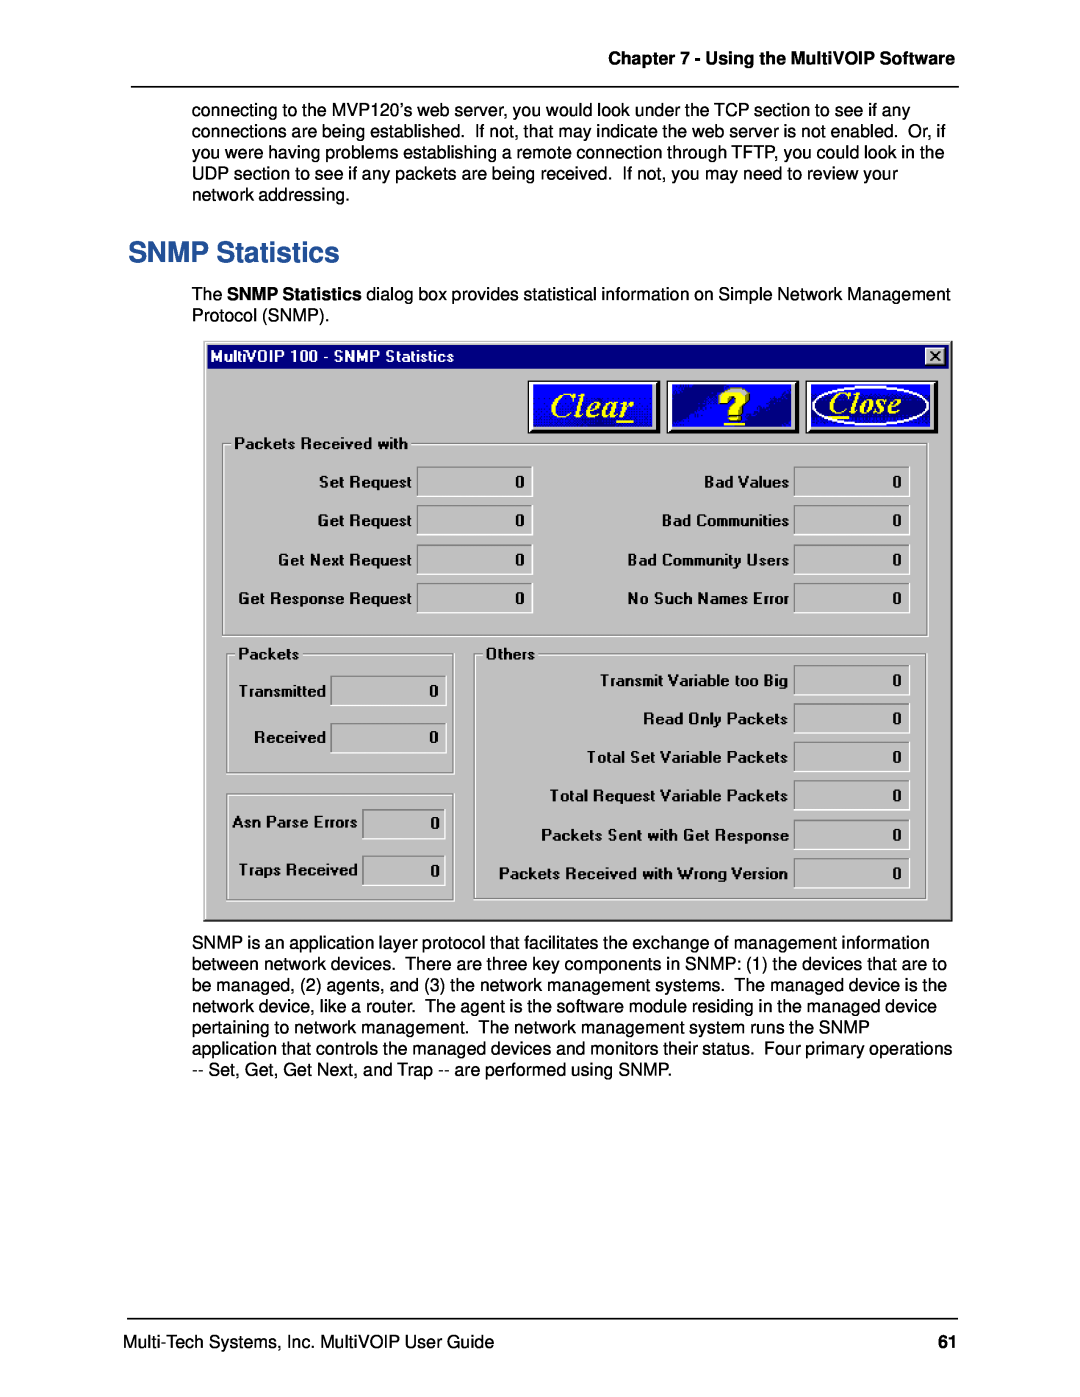 Multi-Tech Systems MVP120 manual SNMP Statistics, Using the MultiVOIP Software 